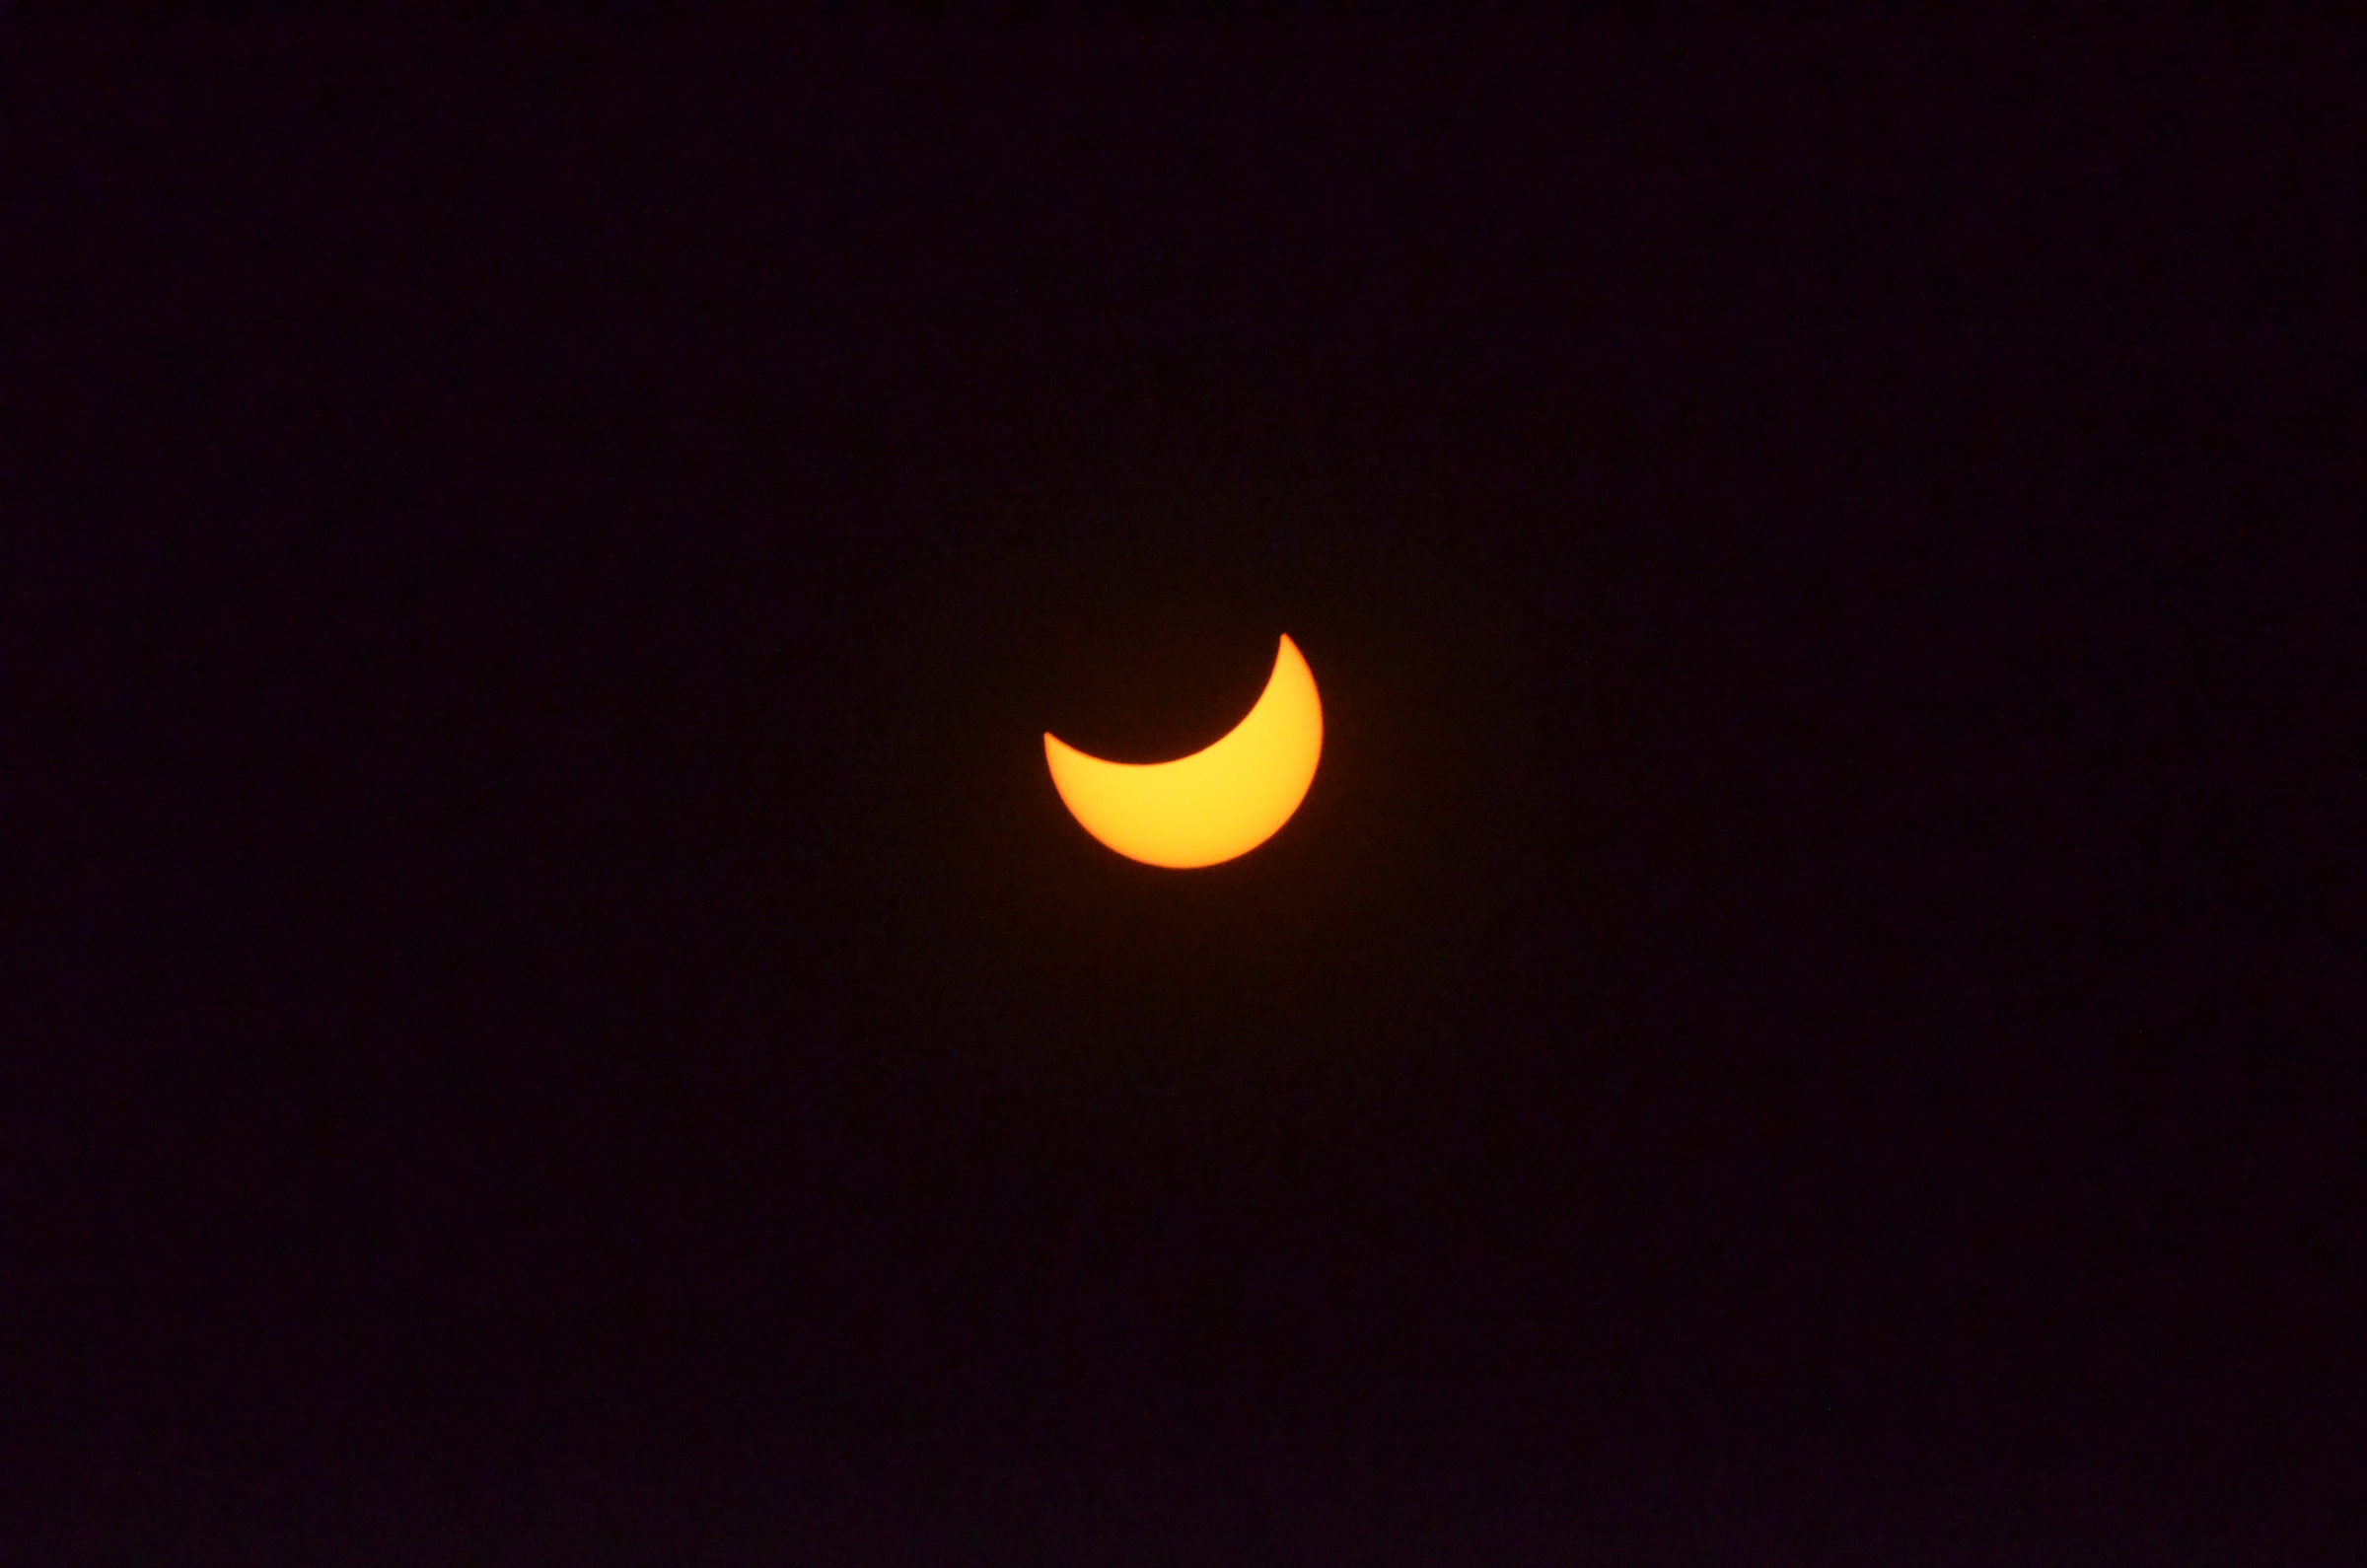 The moon turns the sun into an orange crescent during the partial phase of the April 8 total solar eclipse